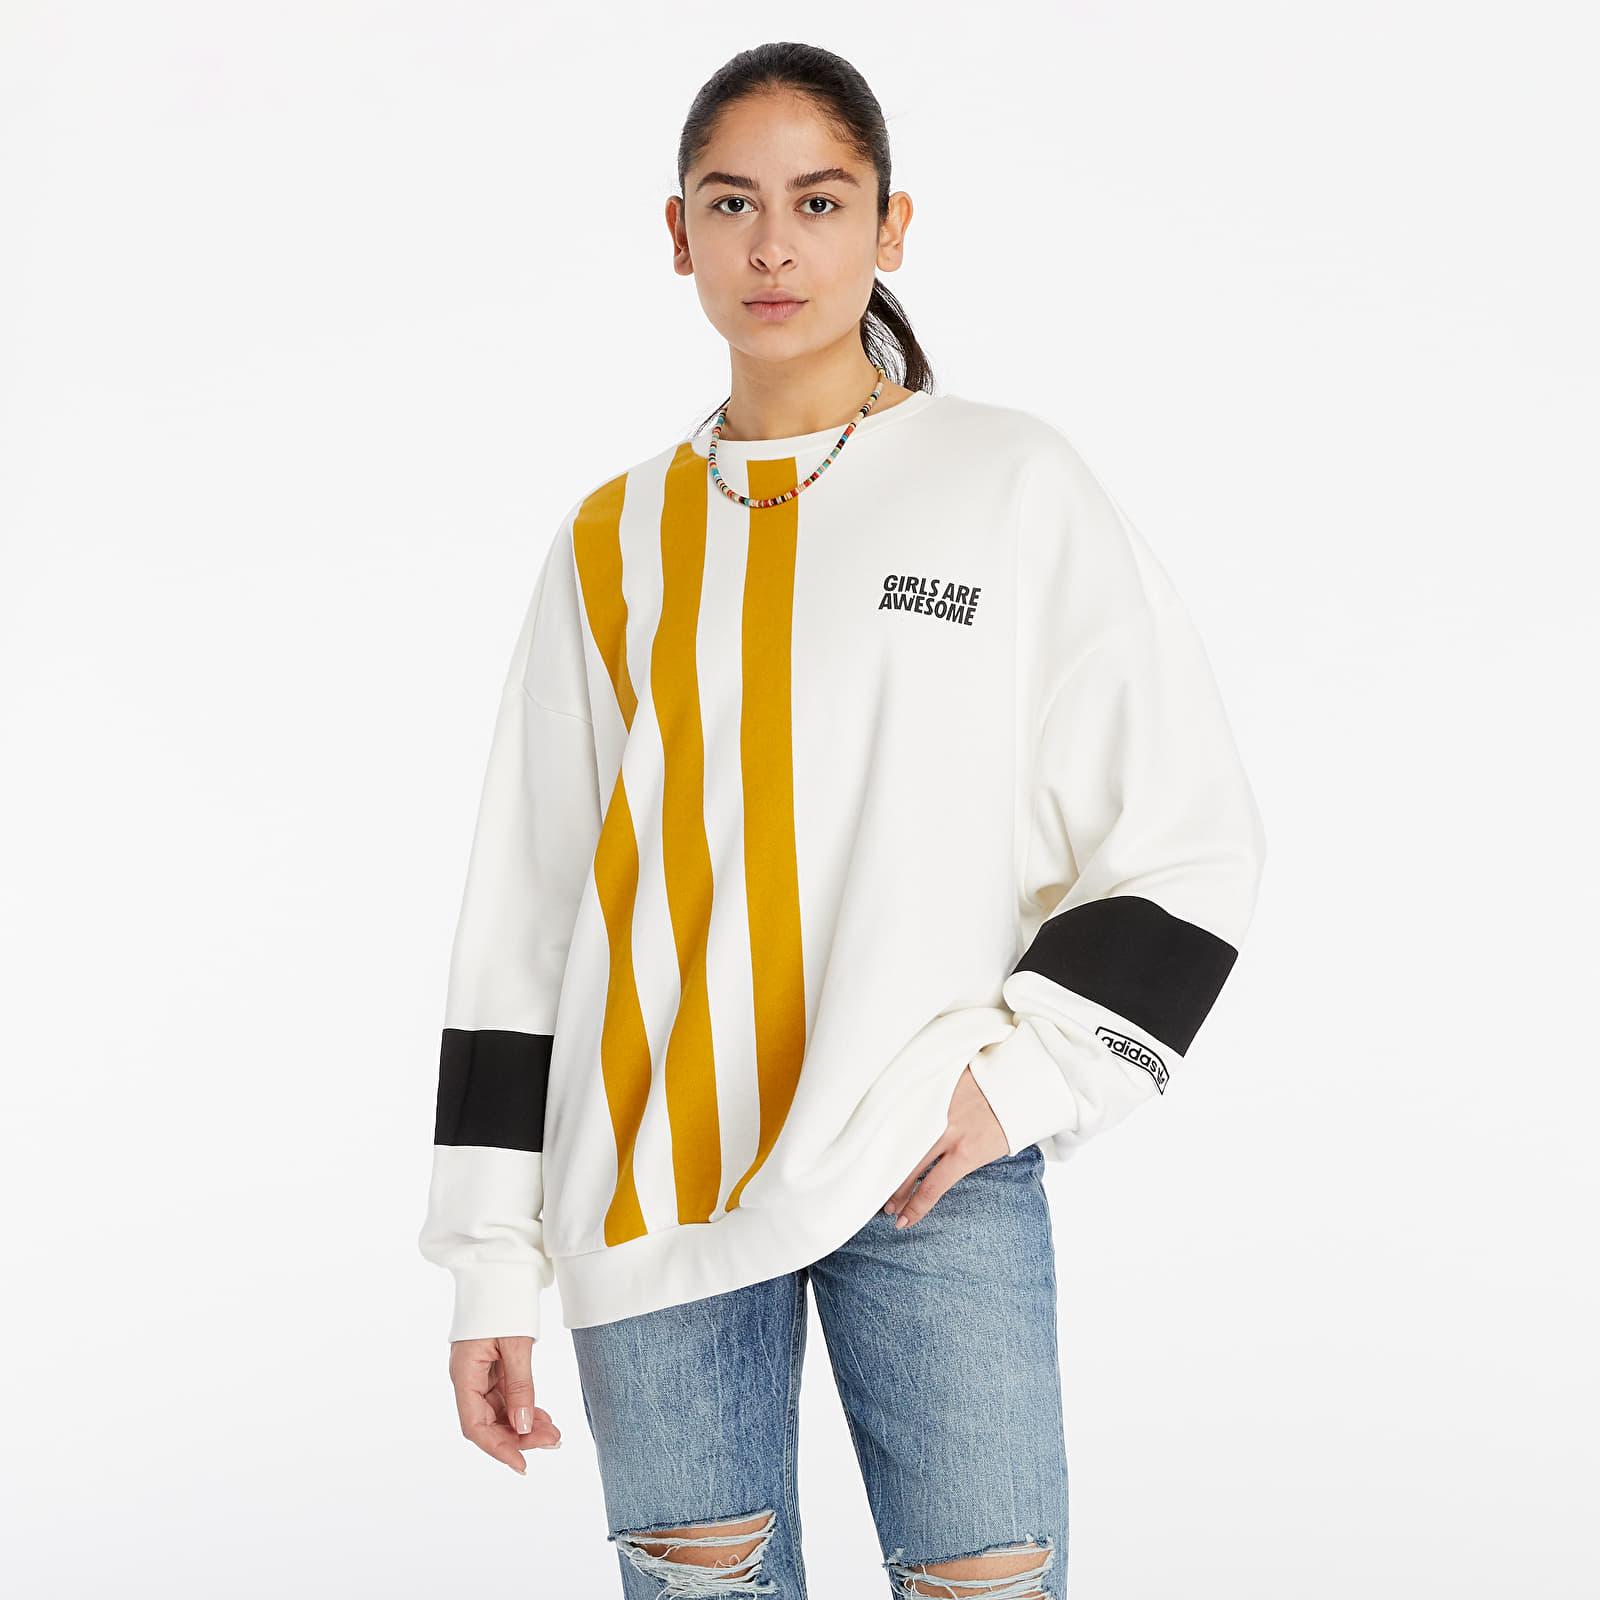 adidas Originals Adidas Girls Are Awesome Sweater Off White - Lyst